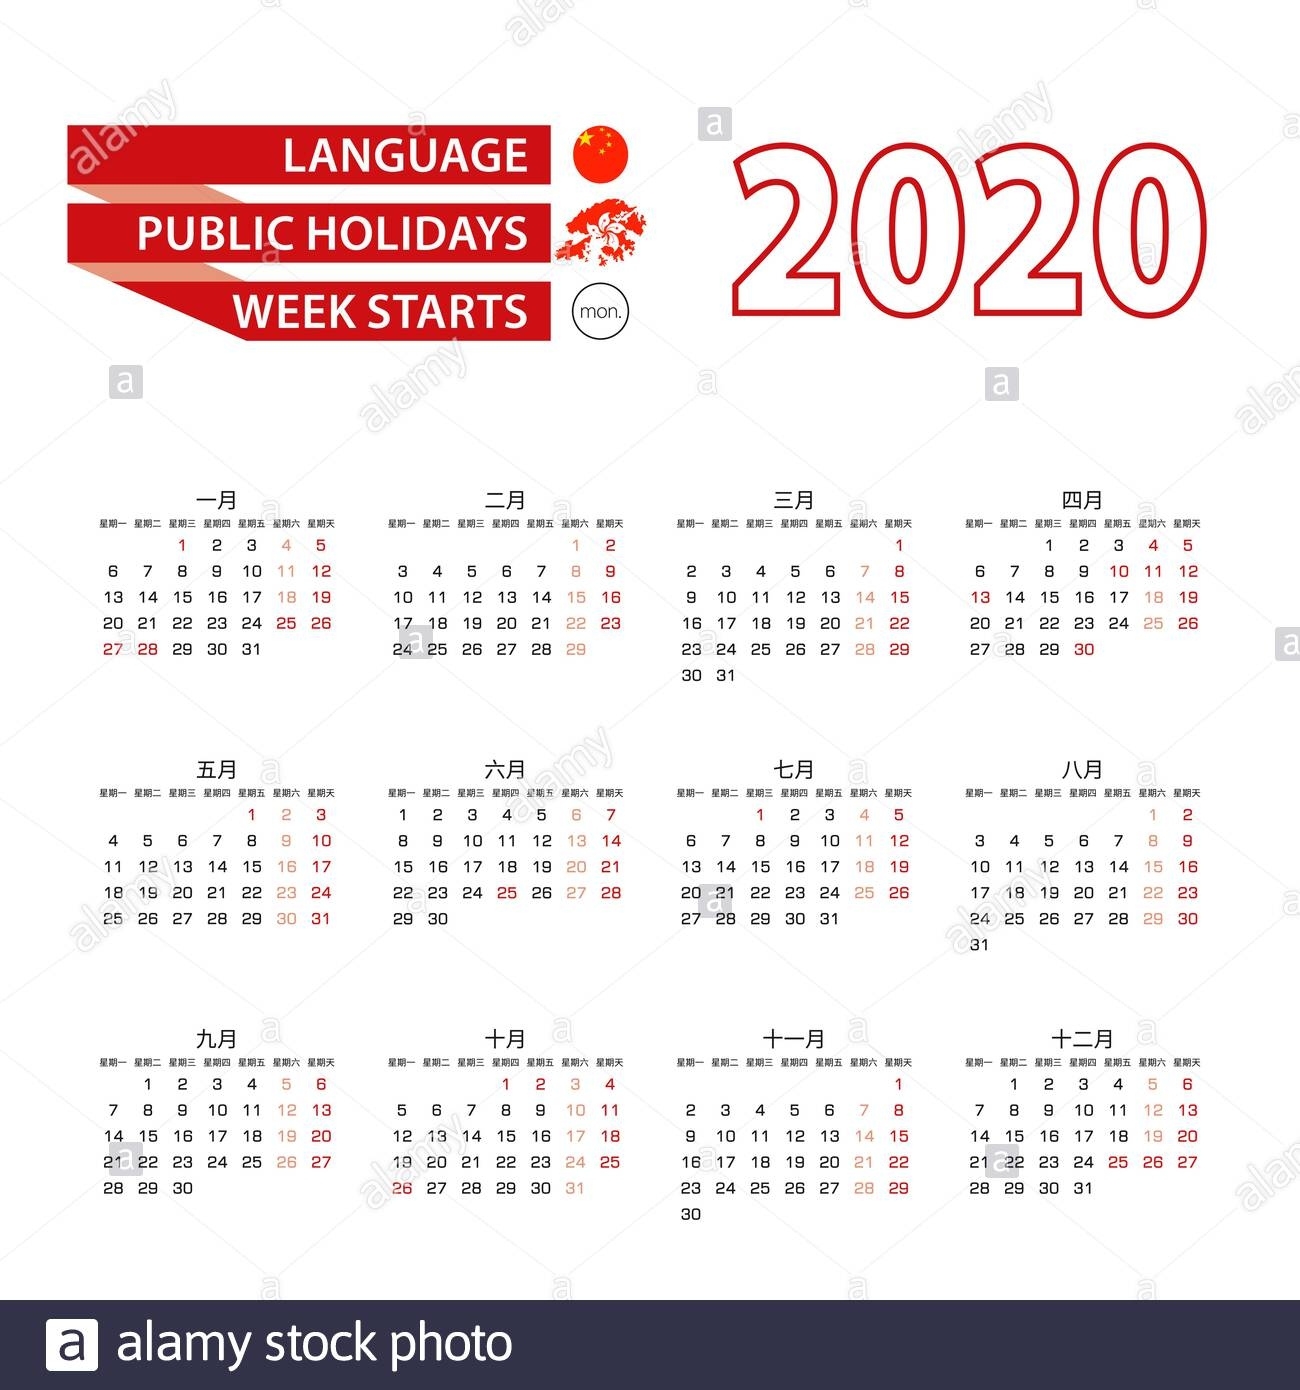 Calendar 2020 In Chinese Language With Public Holidays The Hong Kong Calander 2020 Template